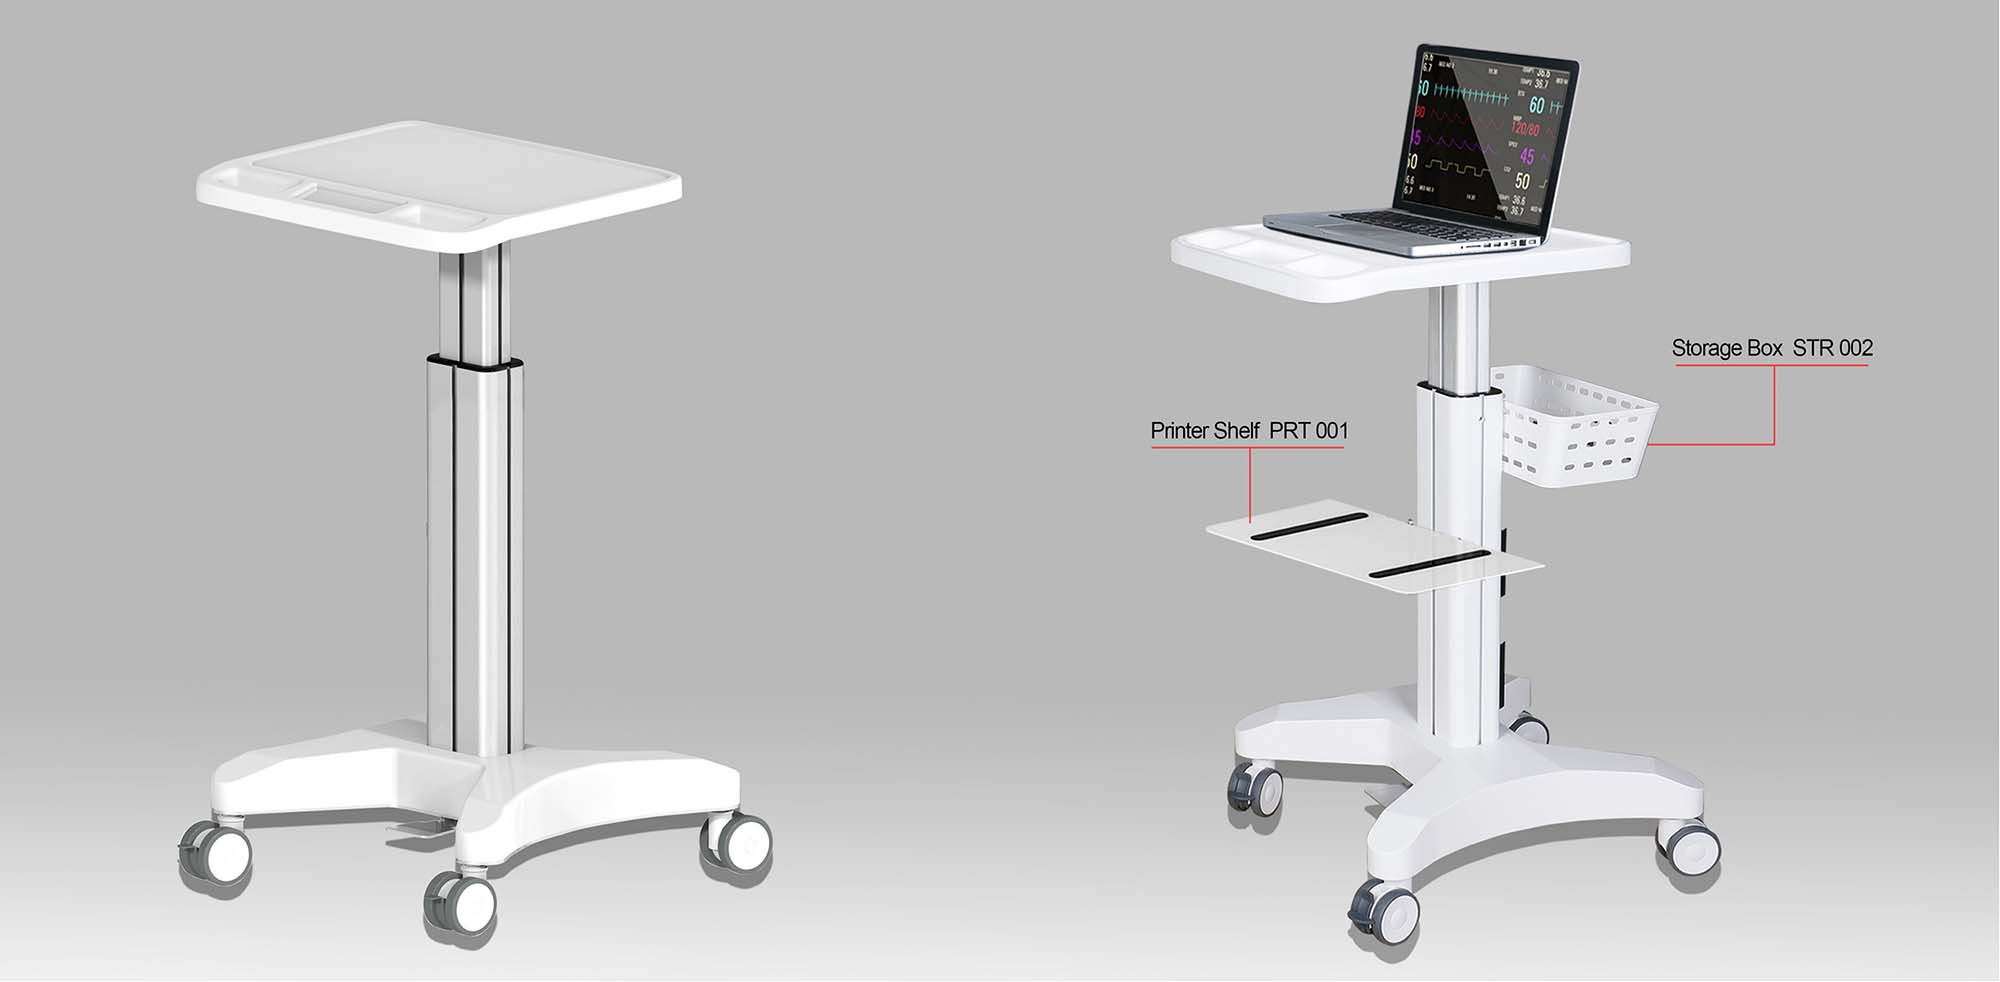 【 Medical cart 】 A mobile medical cart to improve the efficiency of the hospital